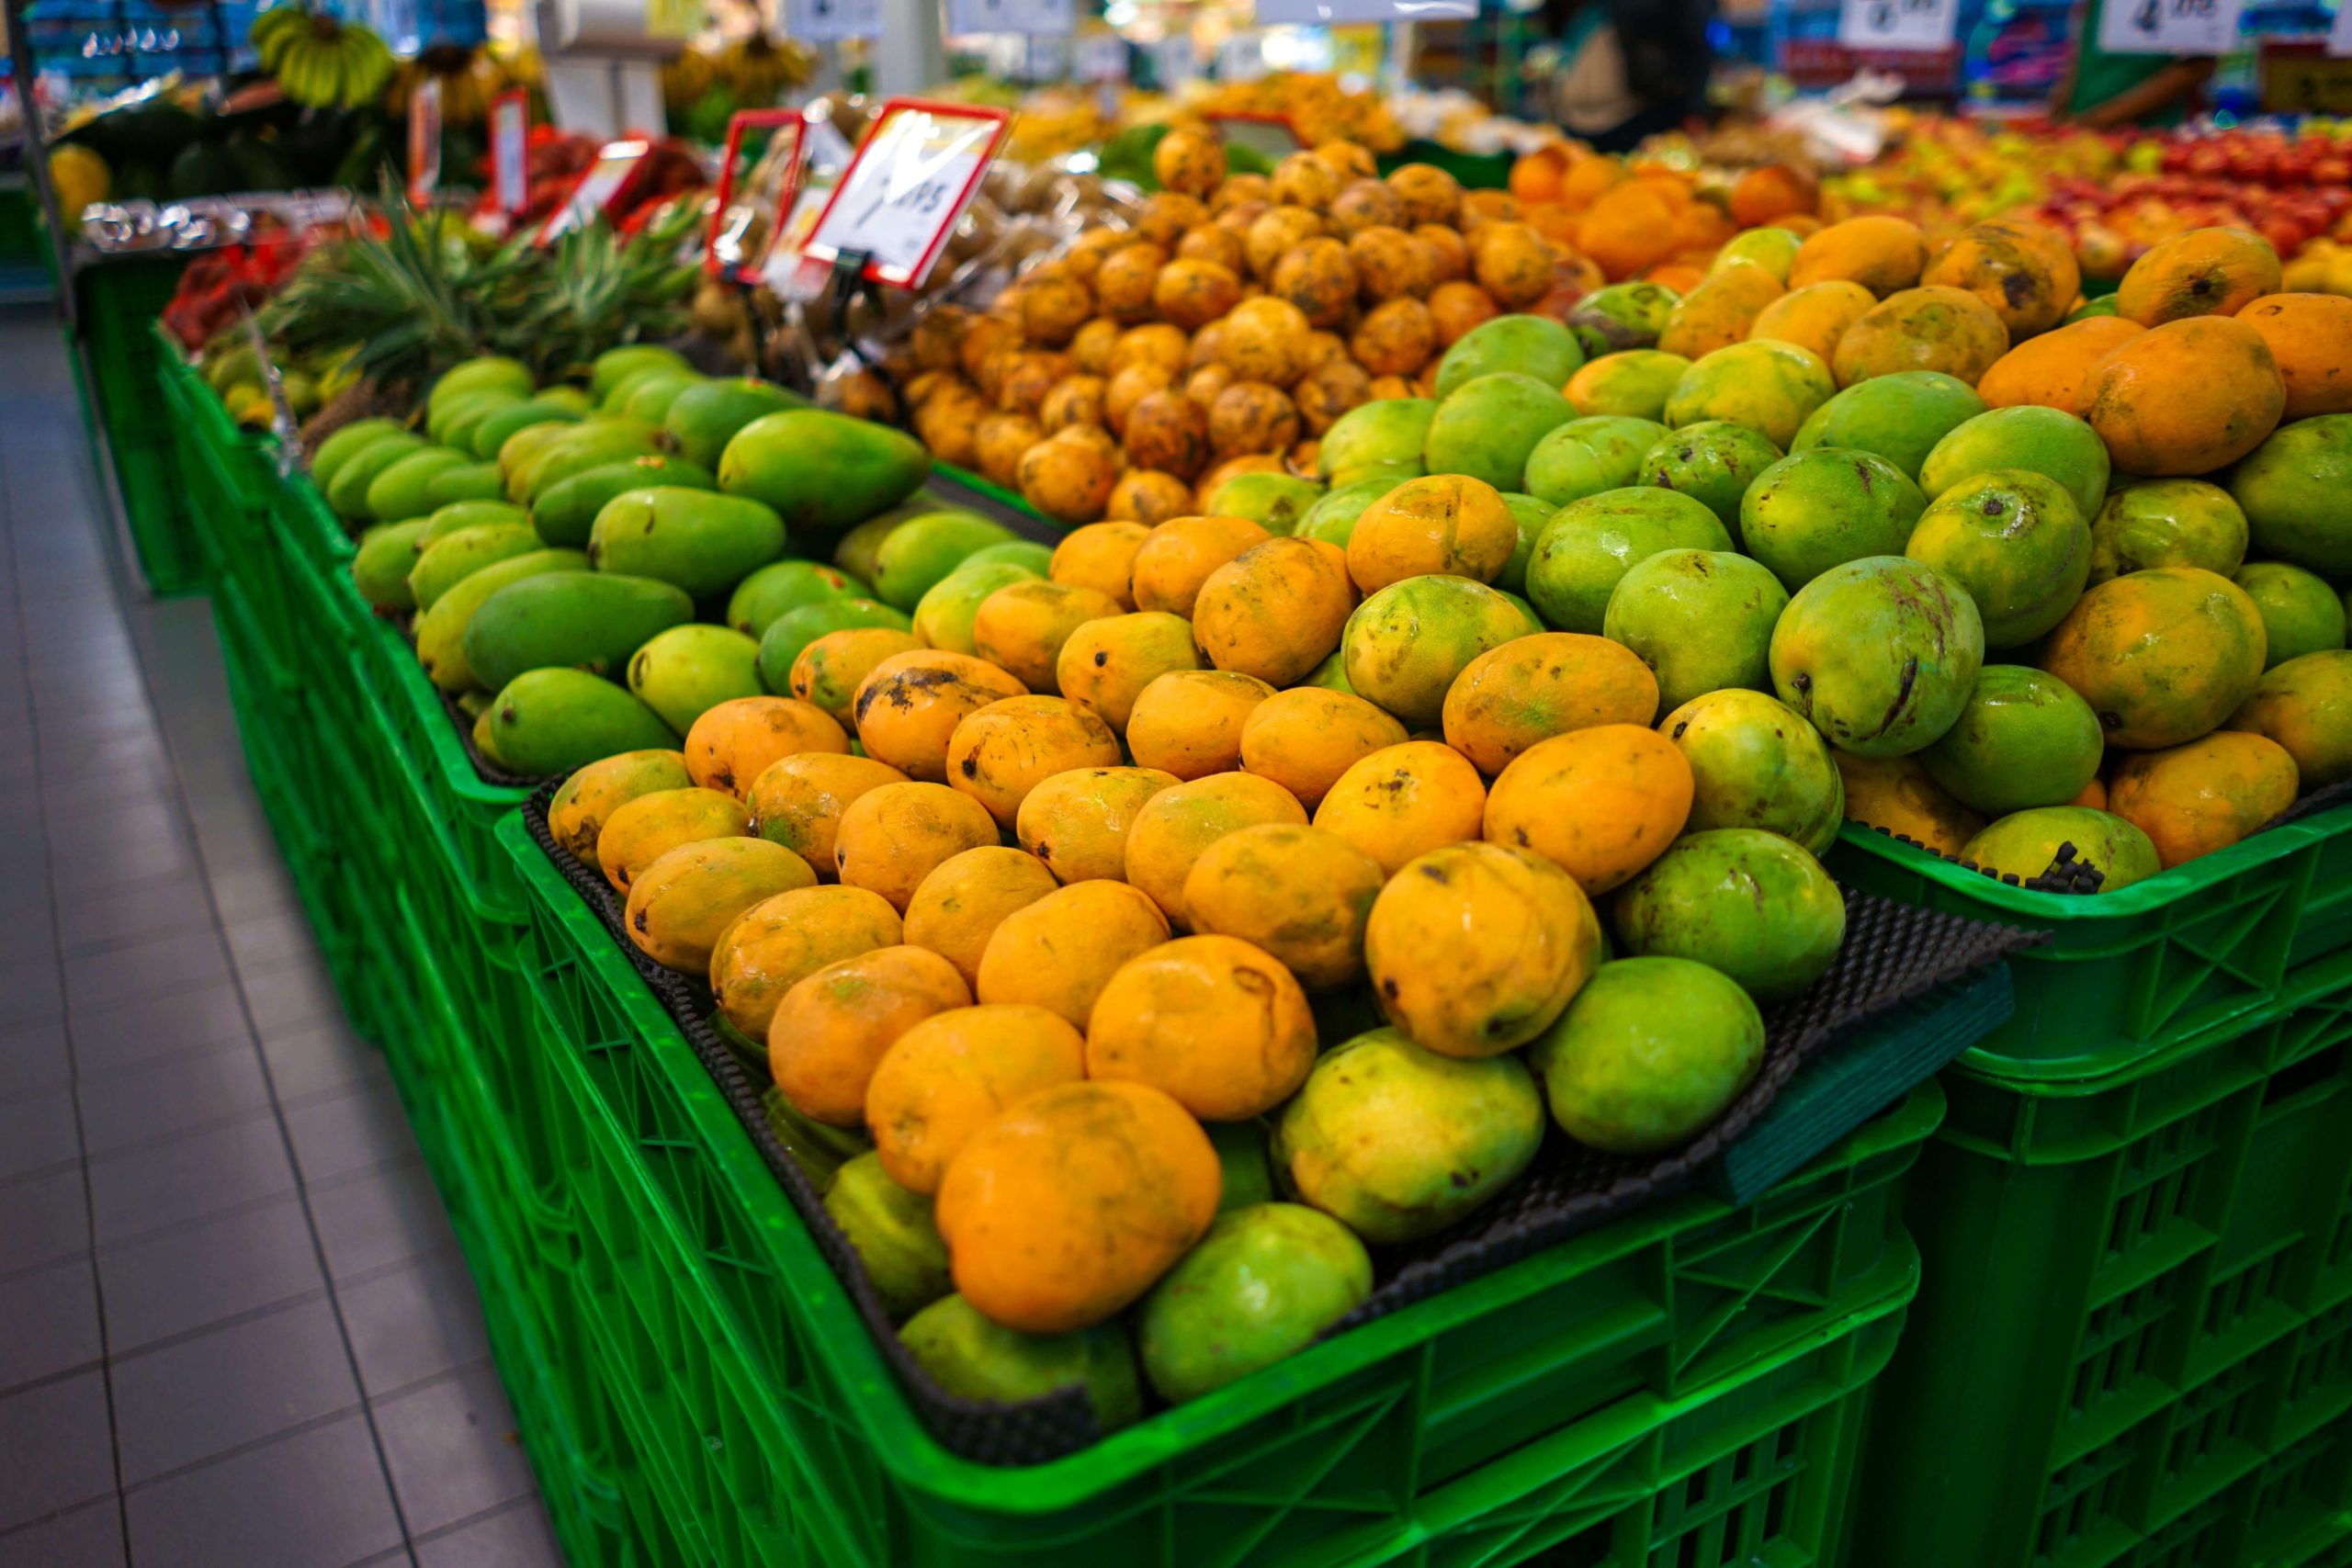 Fruit on sale in an Iceland supermarket